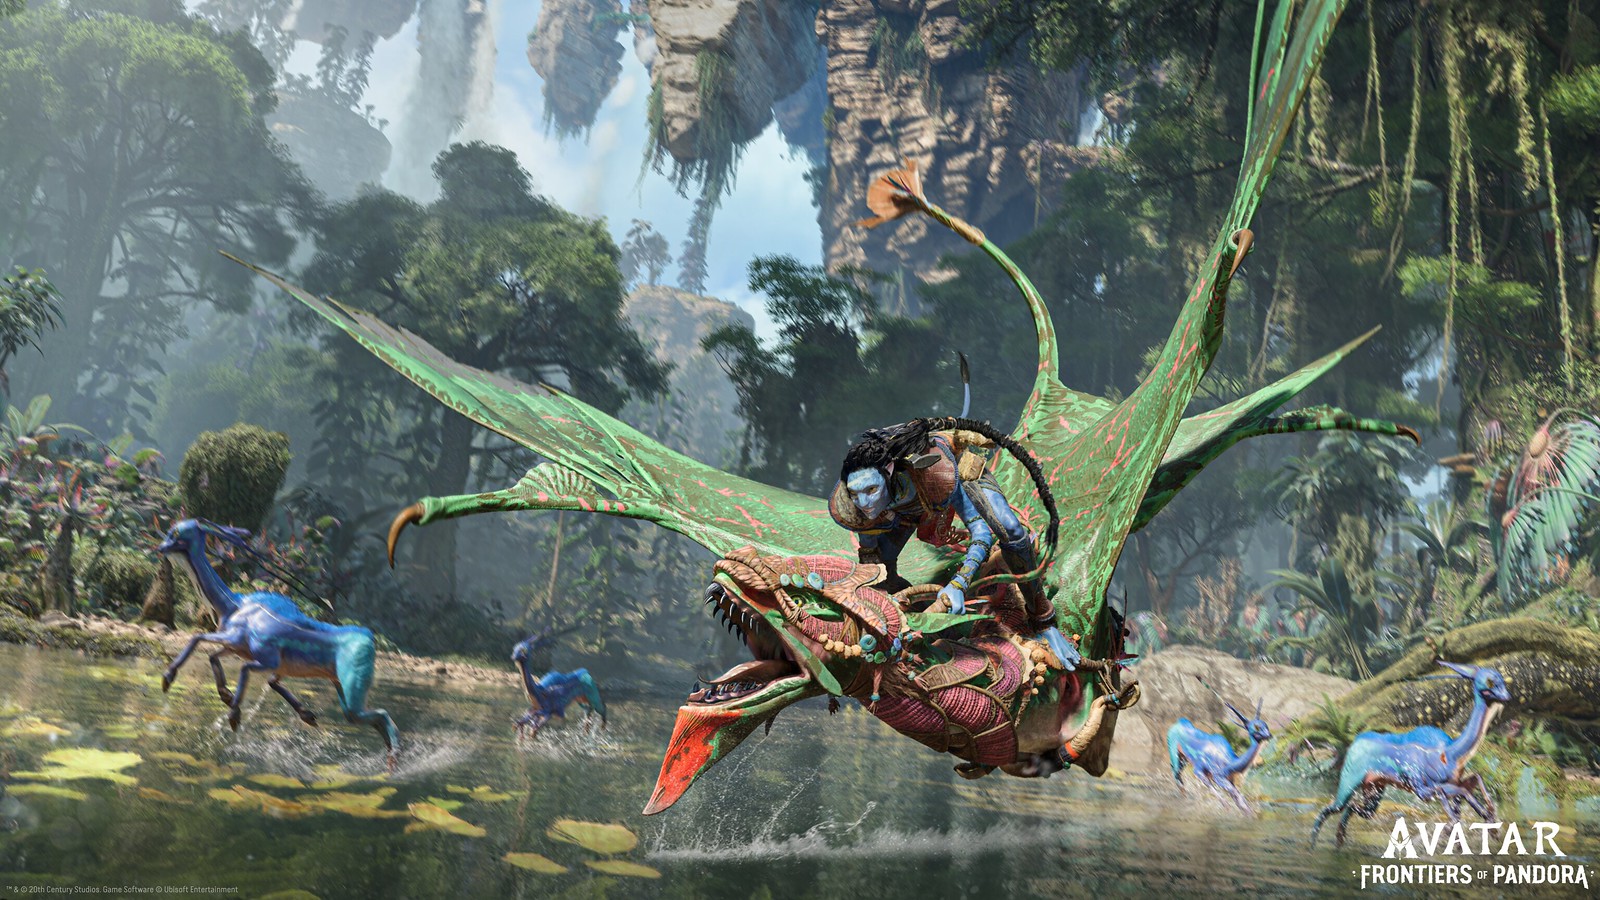 A Na'vi flies on an Ikron in Avatar: Frontiers of Pandora.